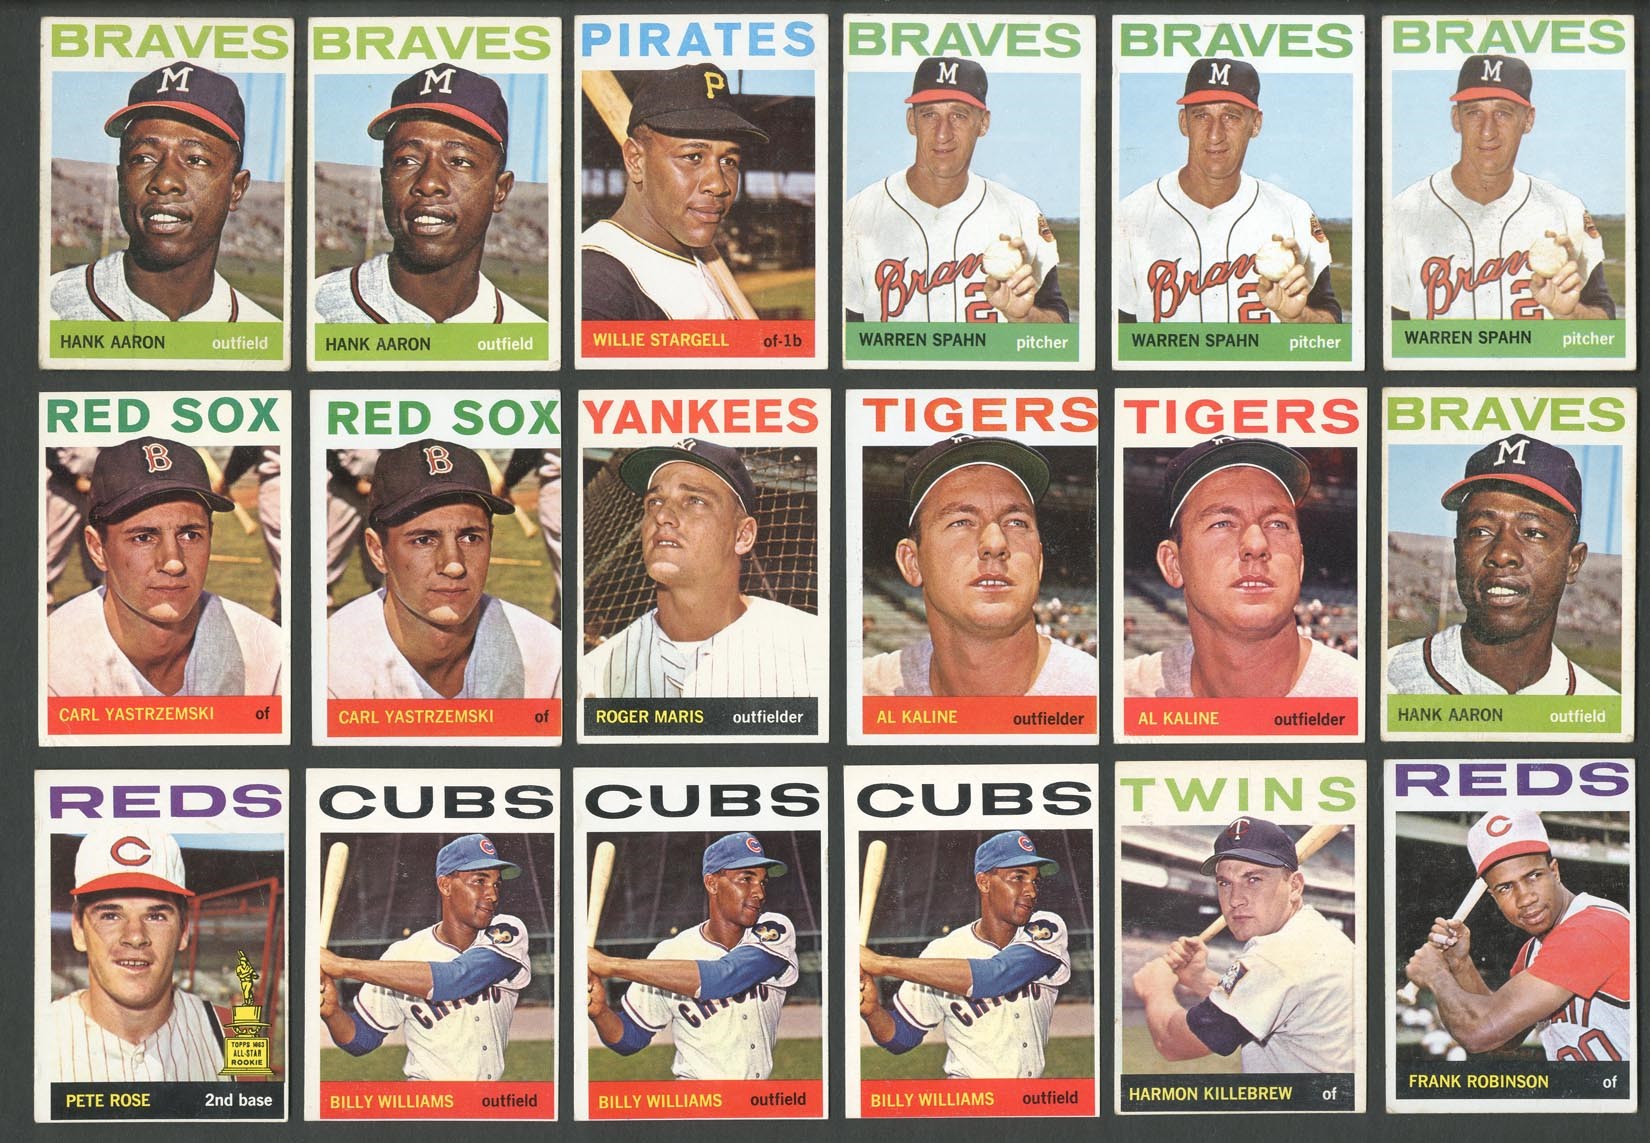 Baseball and Trading Cards - 1960s Topps Collection of Low-to-Mid Grade Cards